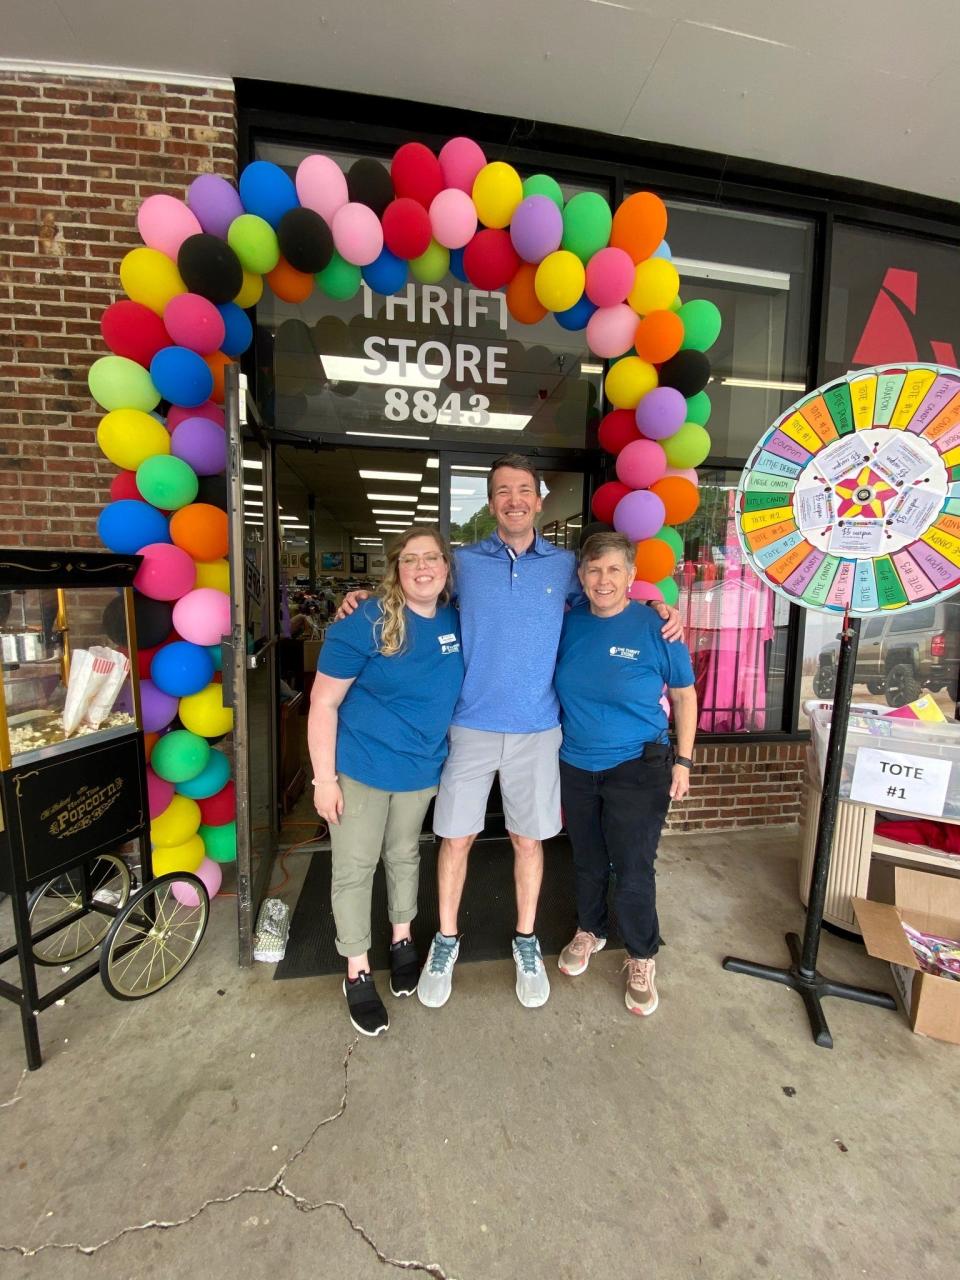 Shown during The Thrift Store’s recent first anniversary celebration are, from left, Megan McNeil, store manager; the Rev. Wil Cantrell, senior associate pastor; and Jane Currin, missions director.